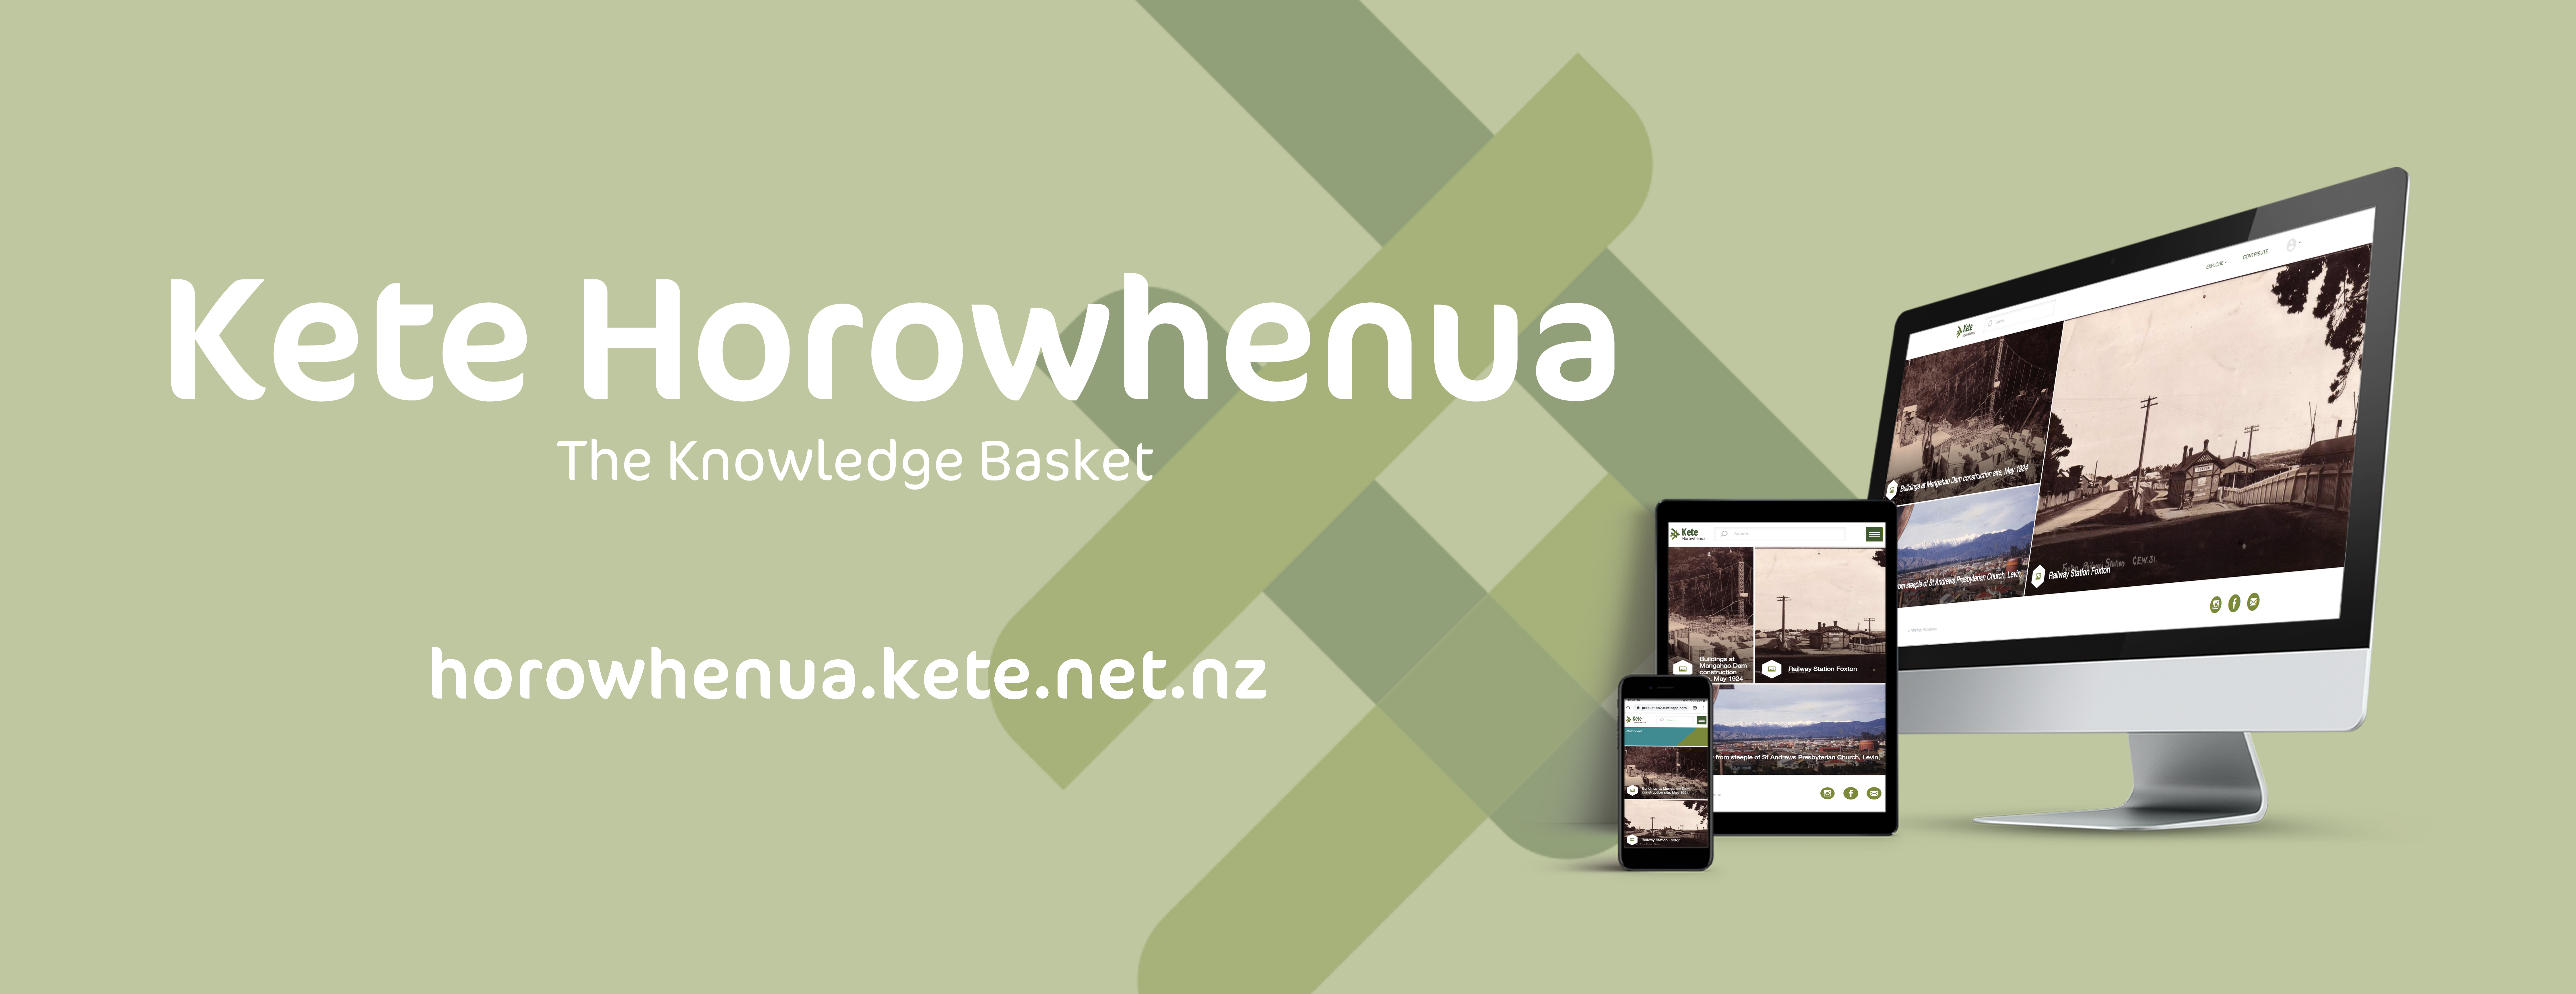 Green Kete Horowhenua banner displaying three devices.